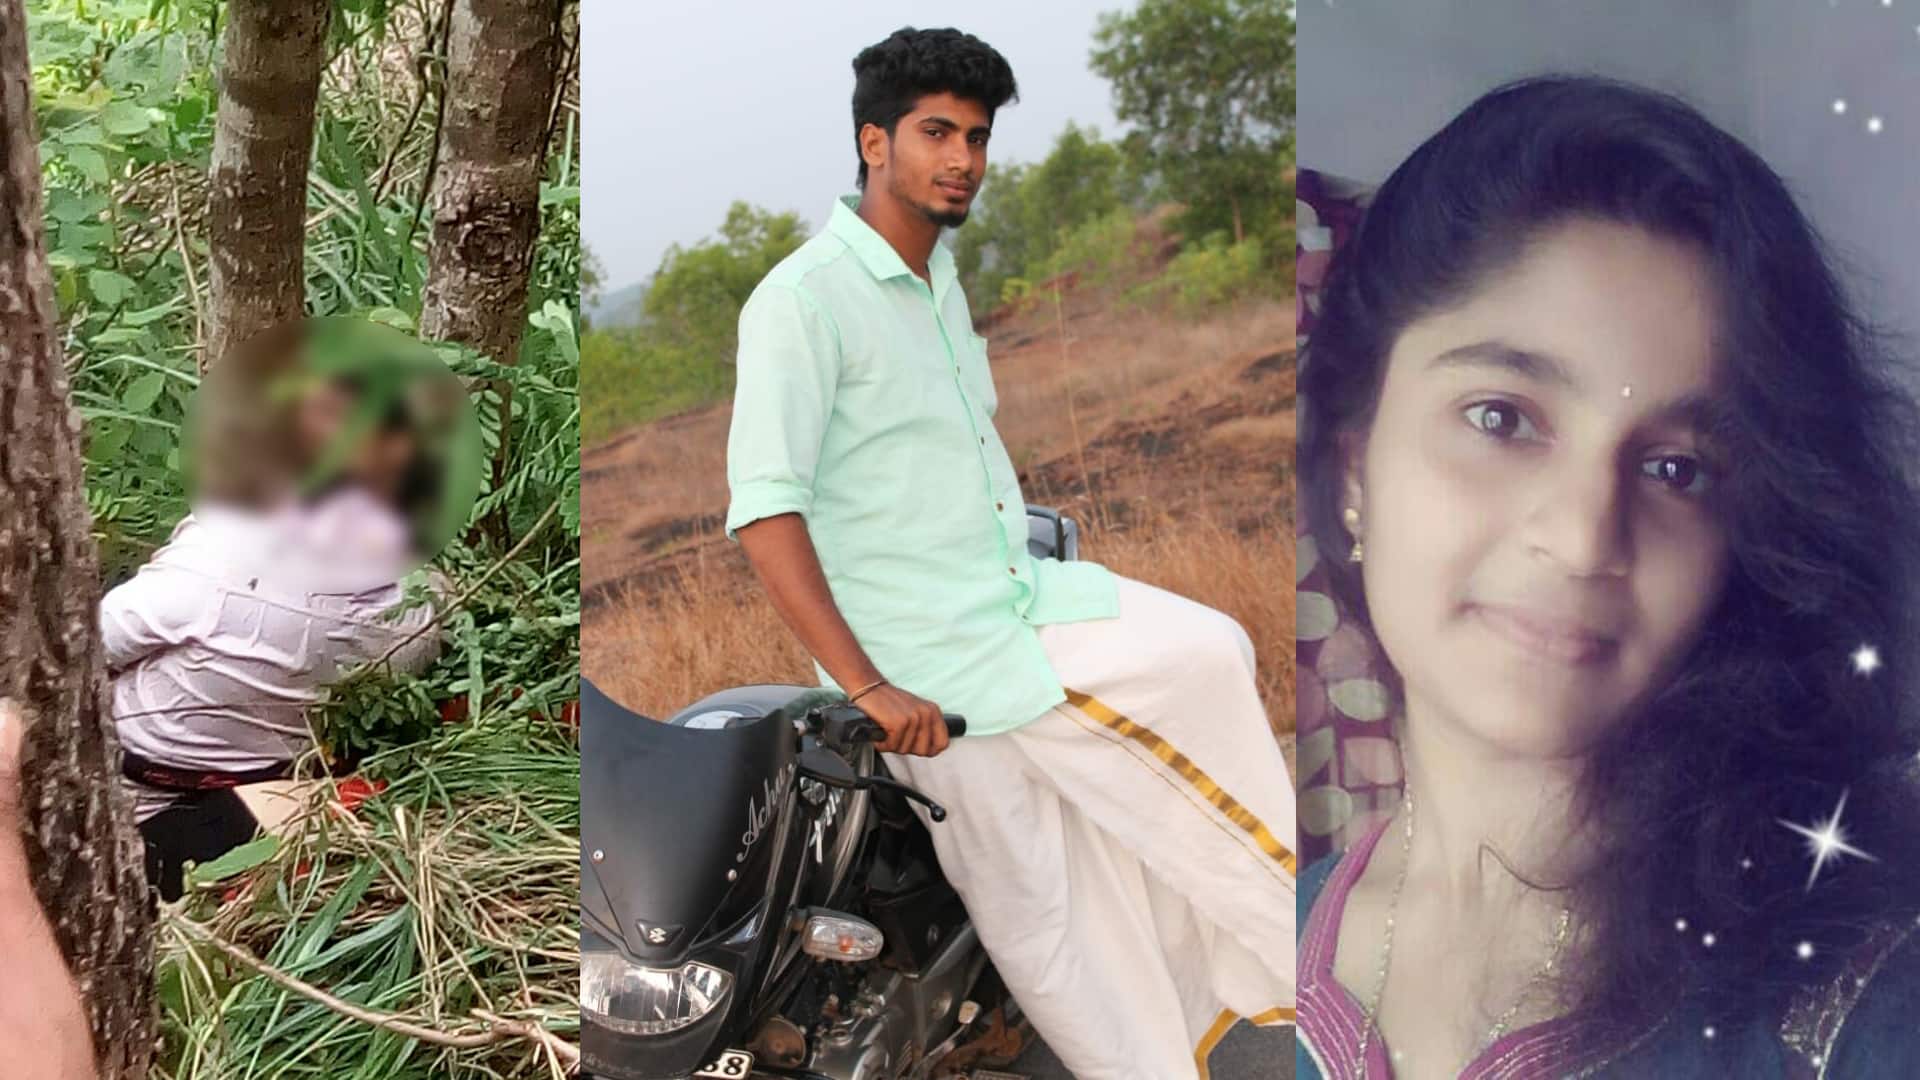 Parents oppose the relationship, couple found dead in Sasipara Park in  Kerala